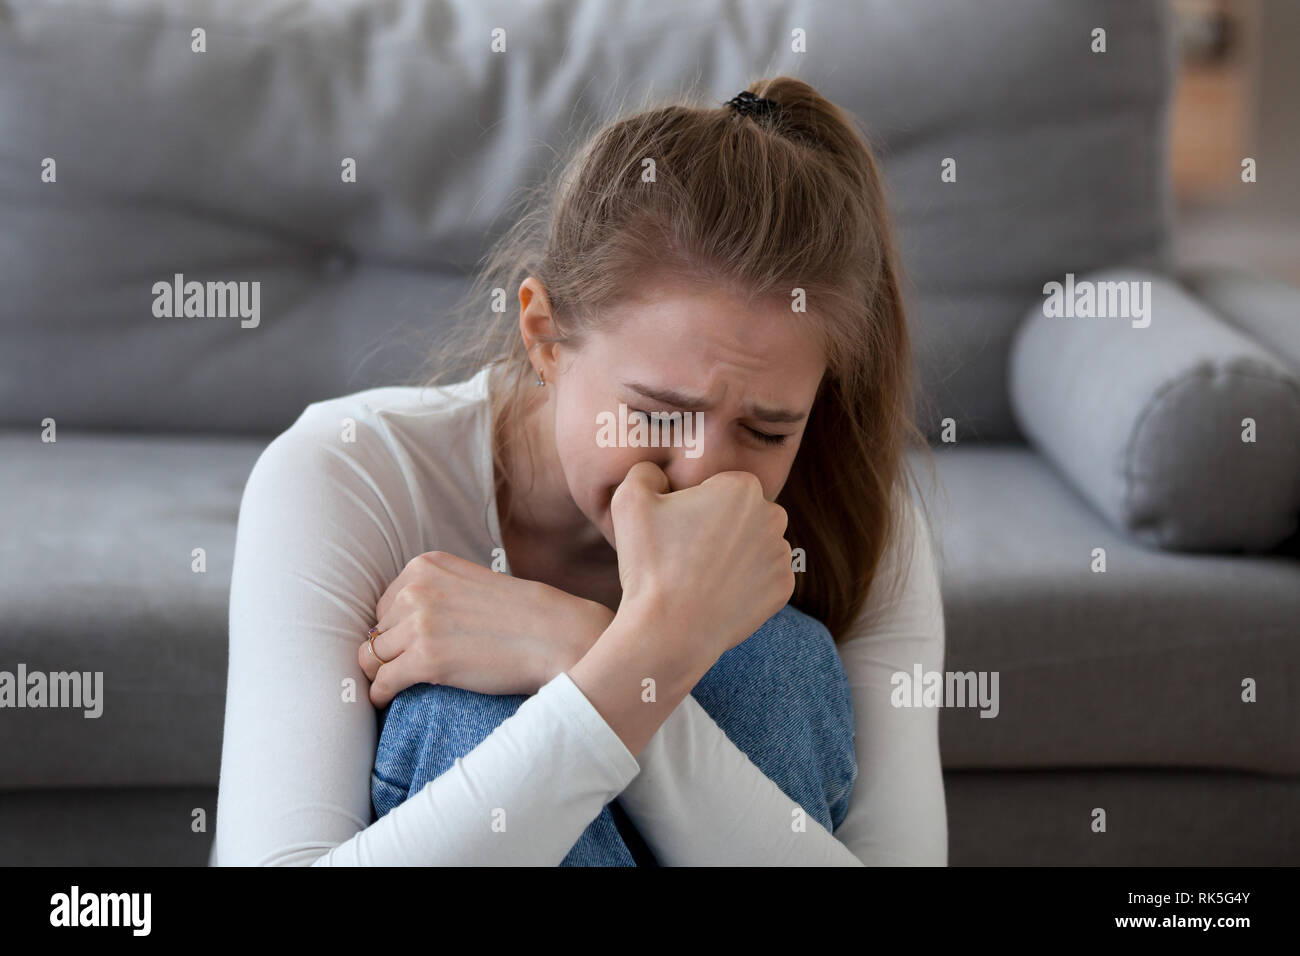 Desperate upset teen girl victim crying alone at home Stock Photo